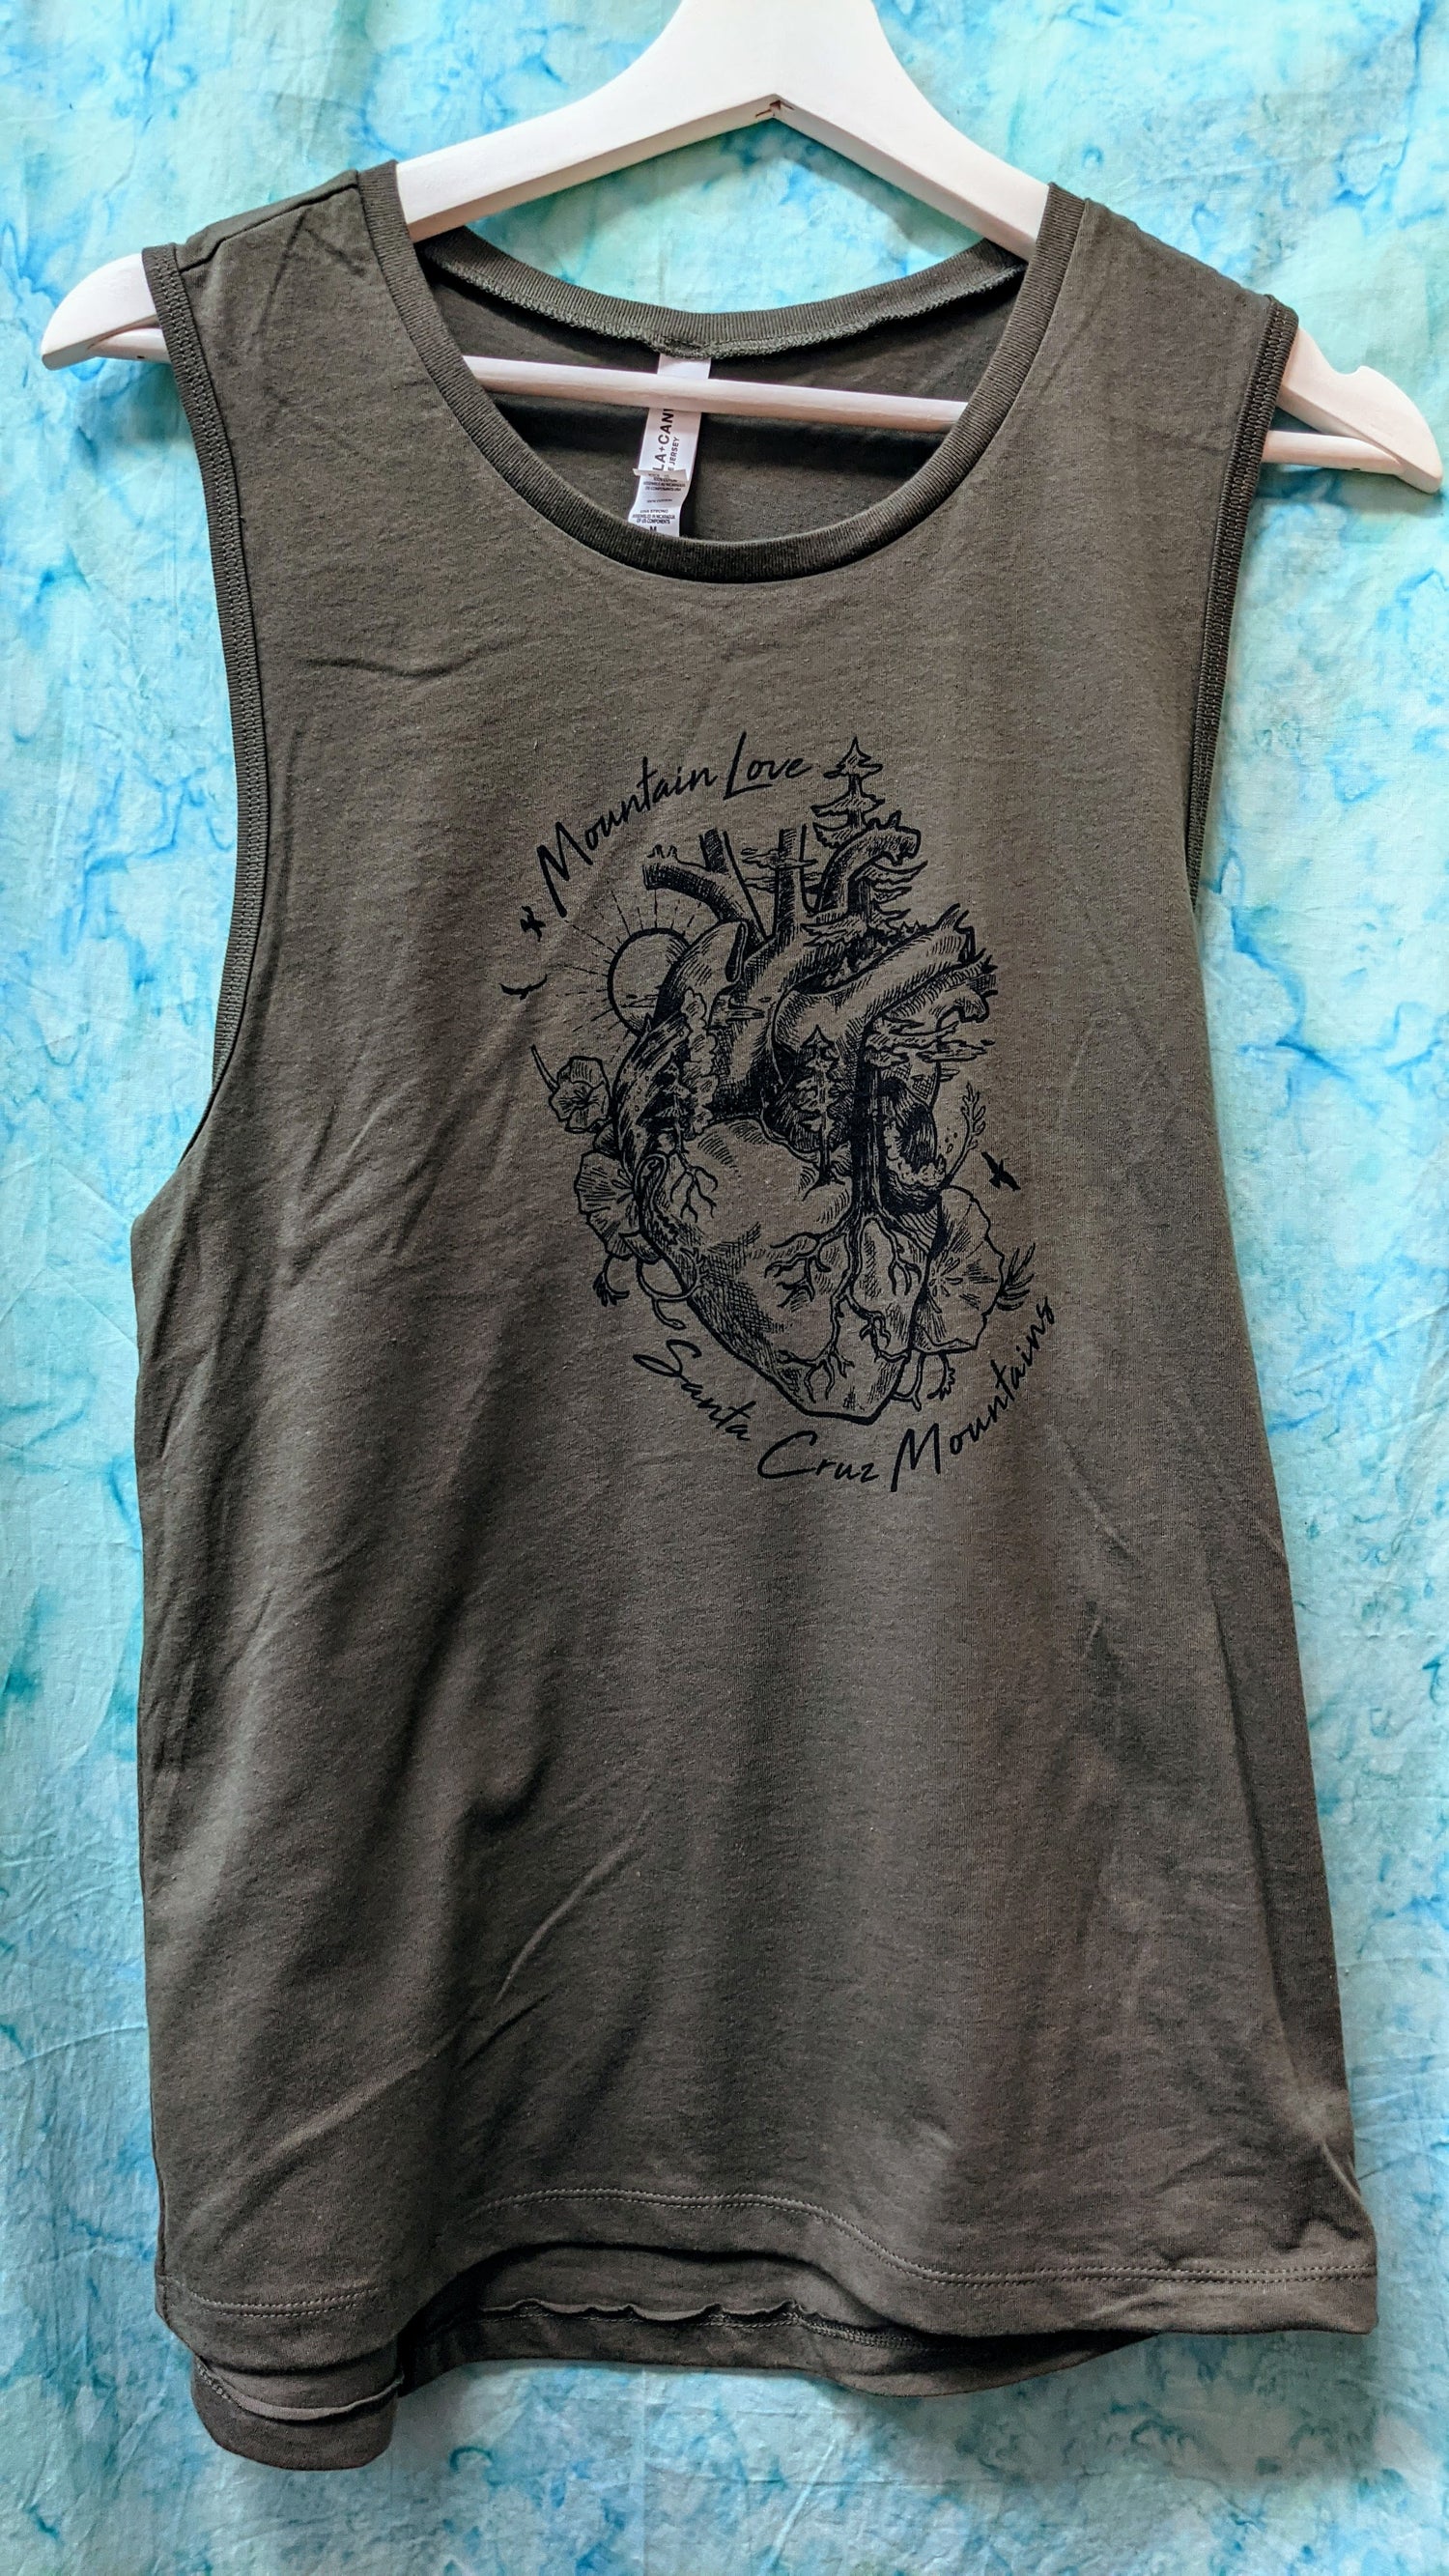 Olive tank with Mountain love forest heart design, by SCM Clothing